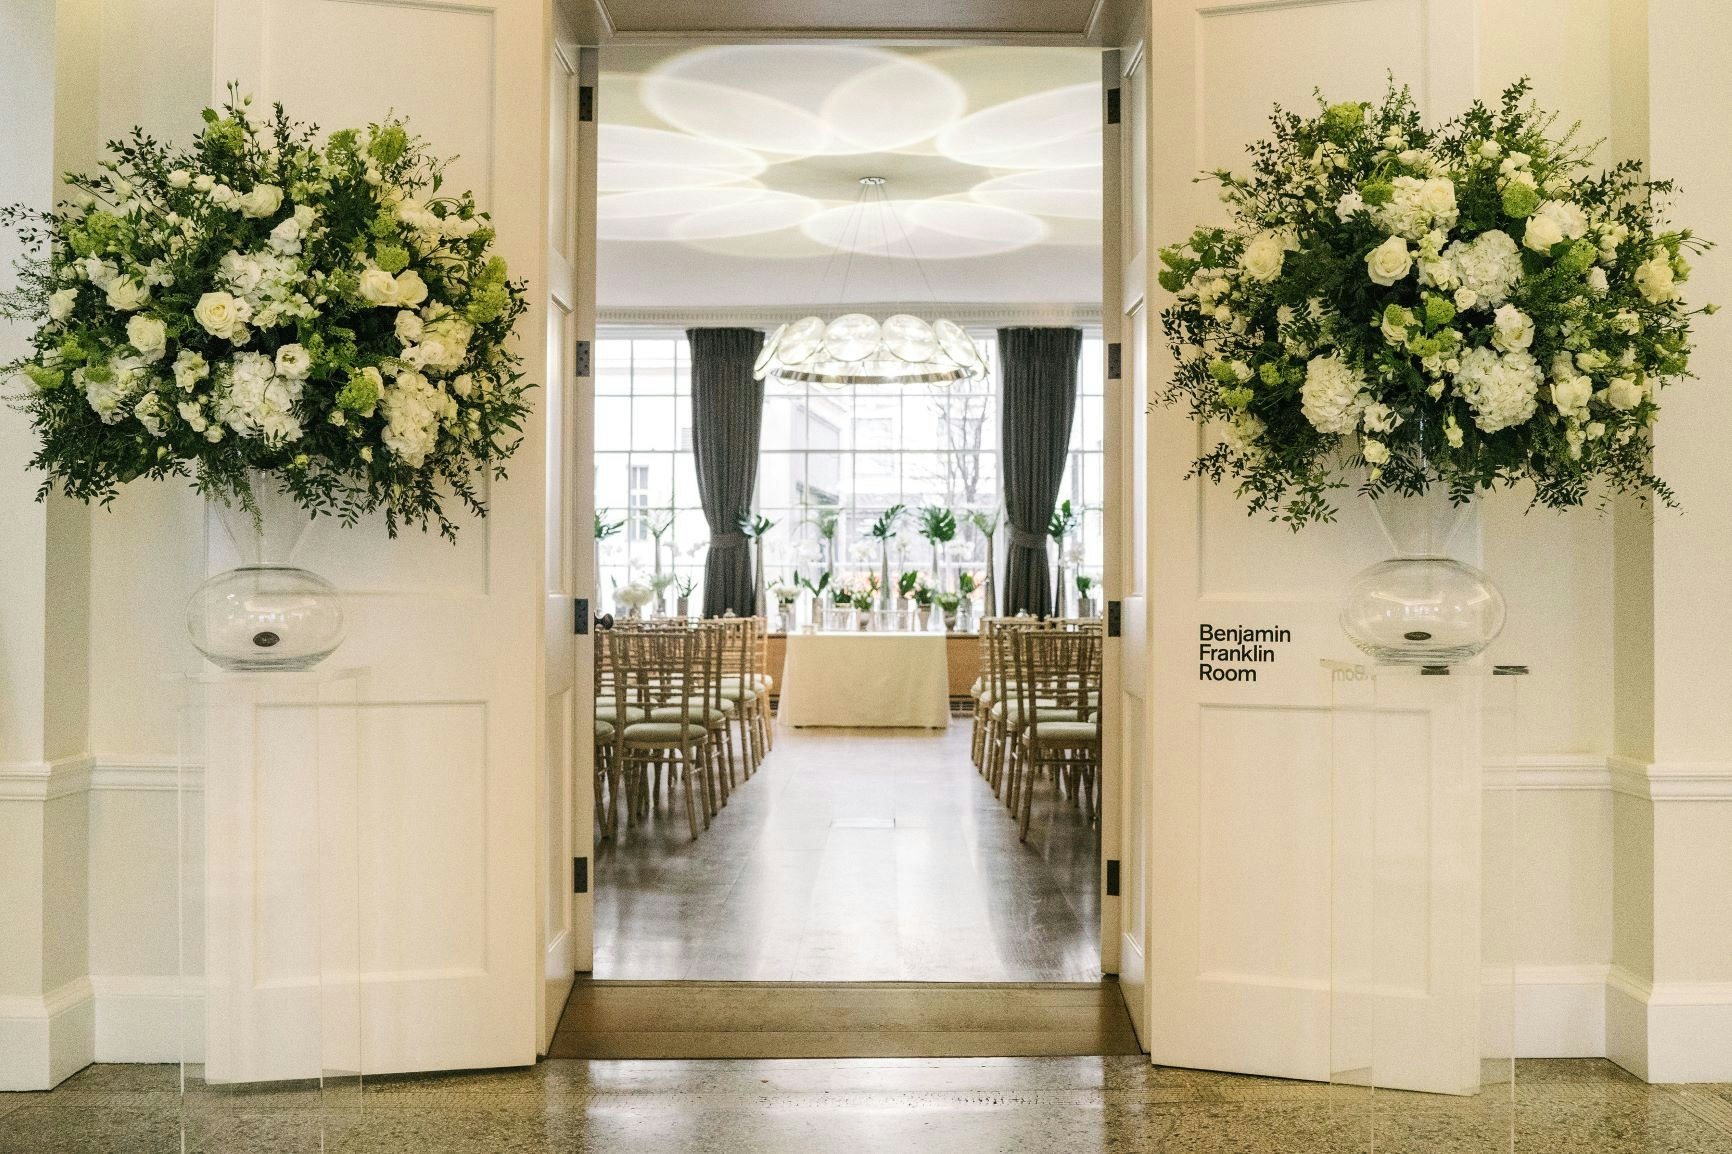 Weddings | Exclusive Hire for Weddings at RSA House